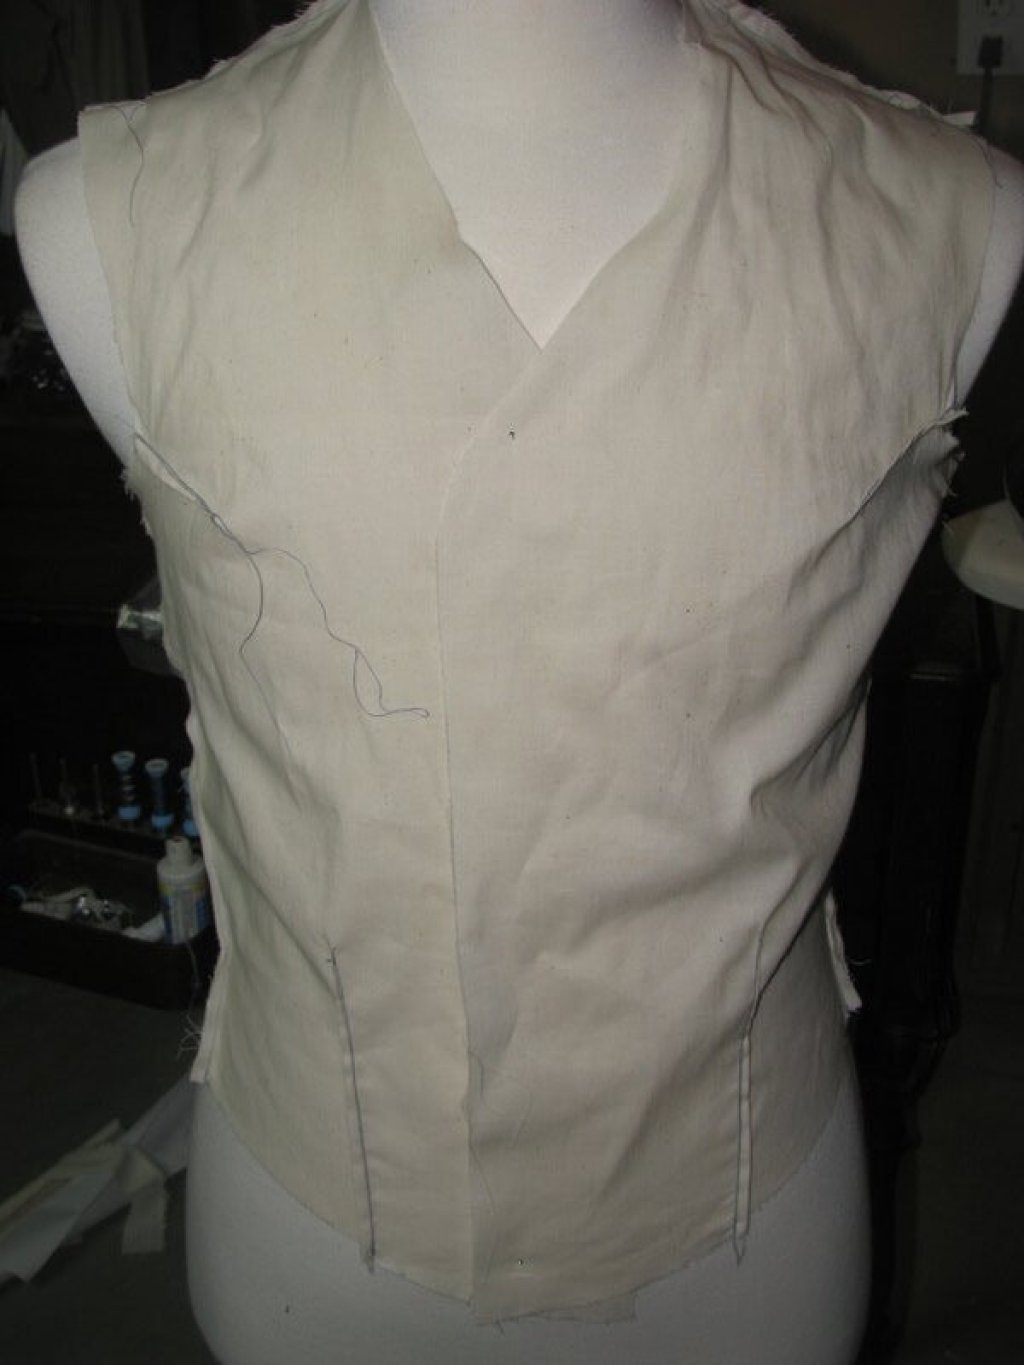 A muslin toile to test the fit of the waistcoat pattern.